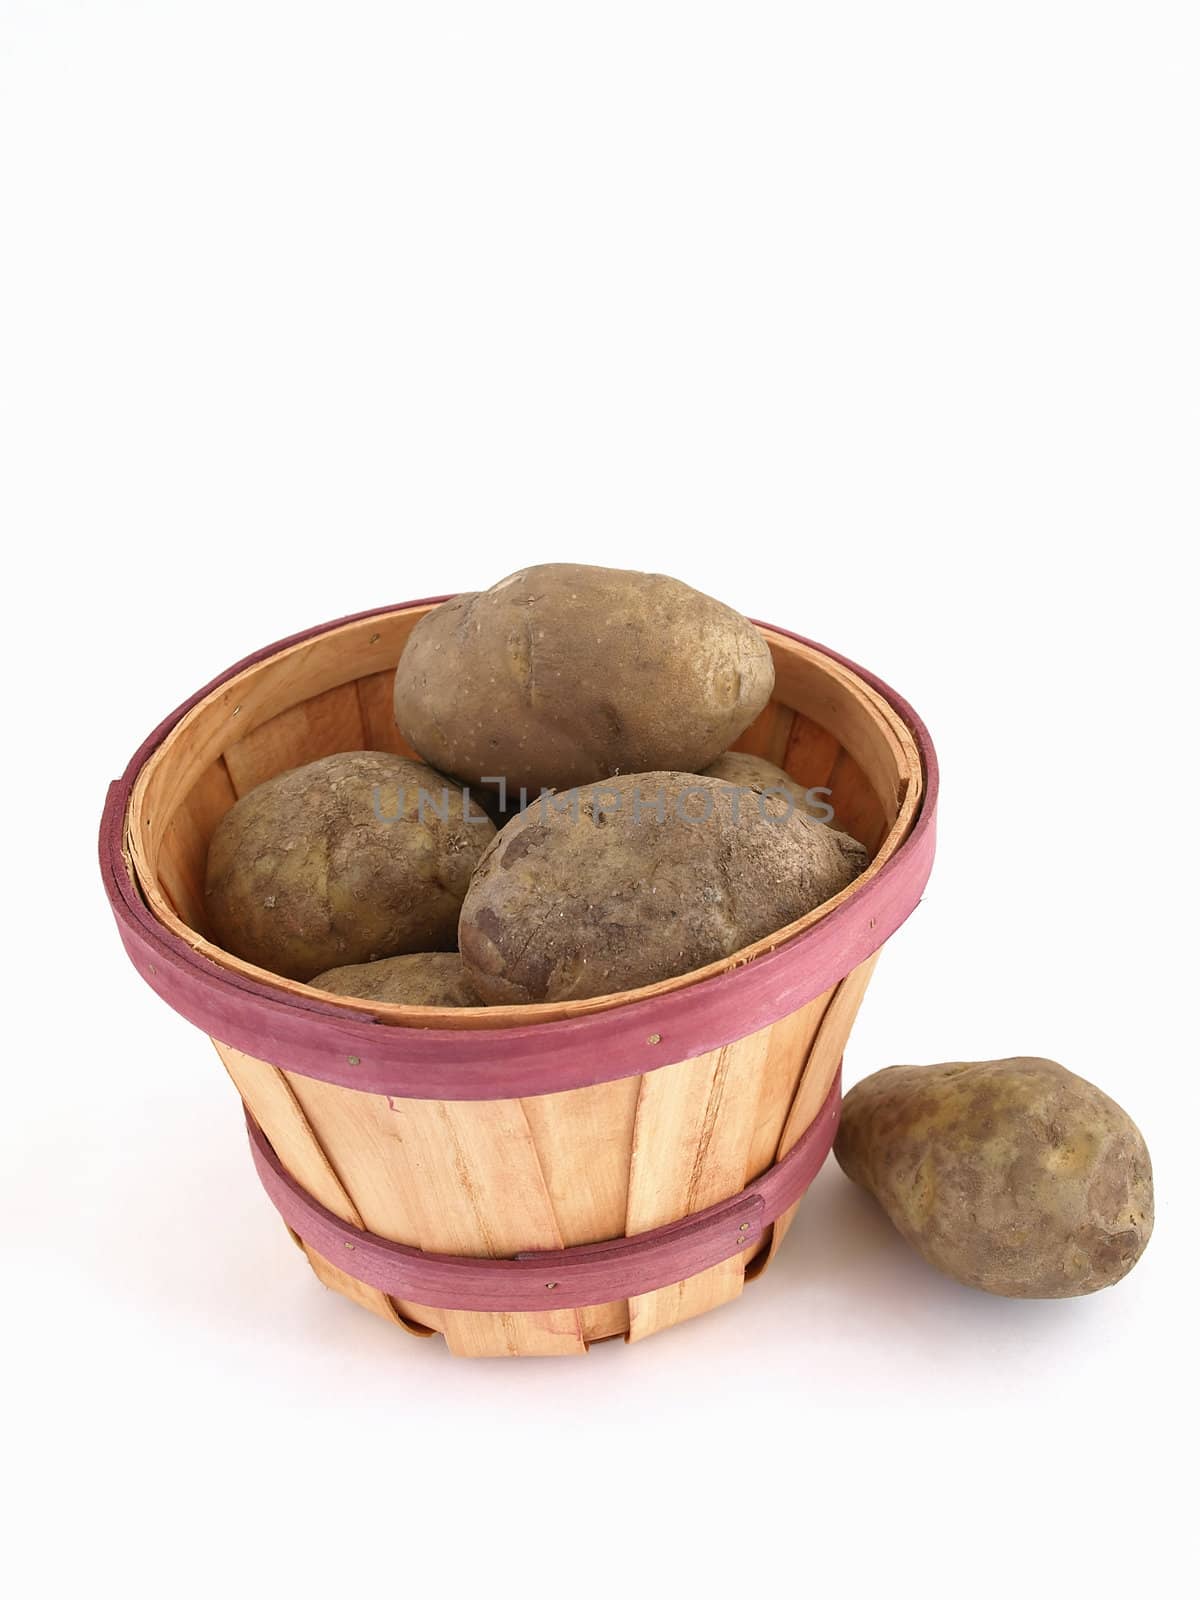 A basket of potatoes. Studio isolated on a white background.